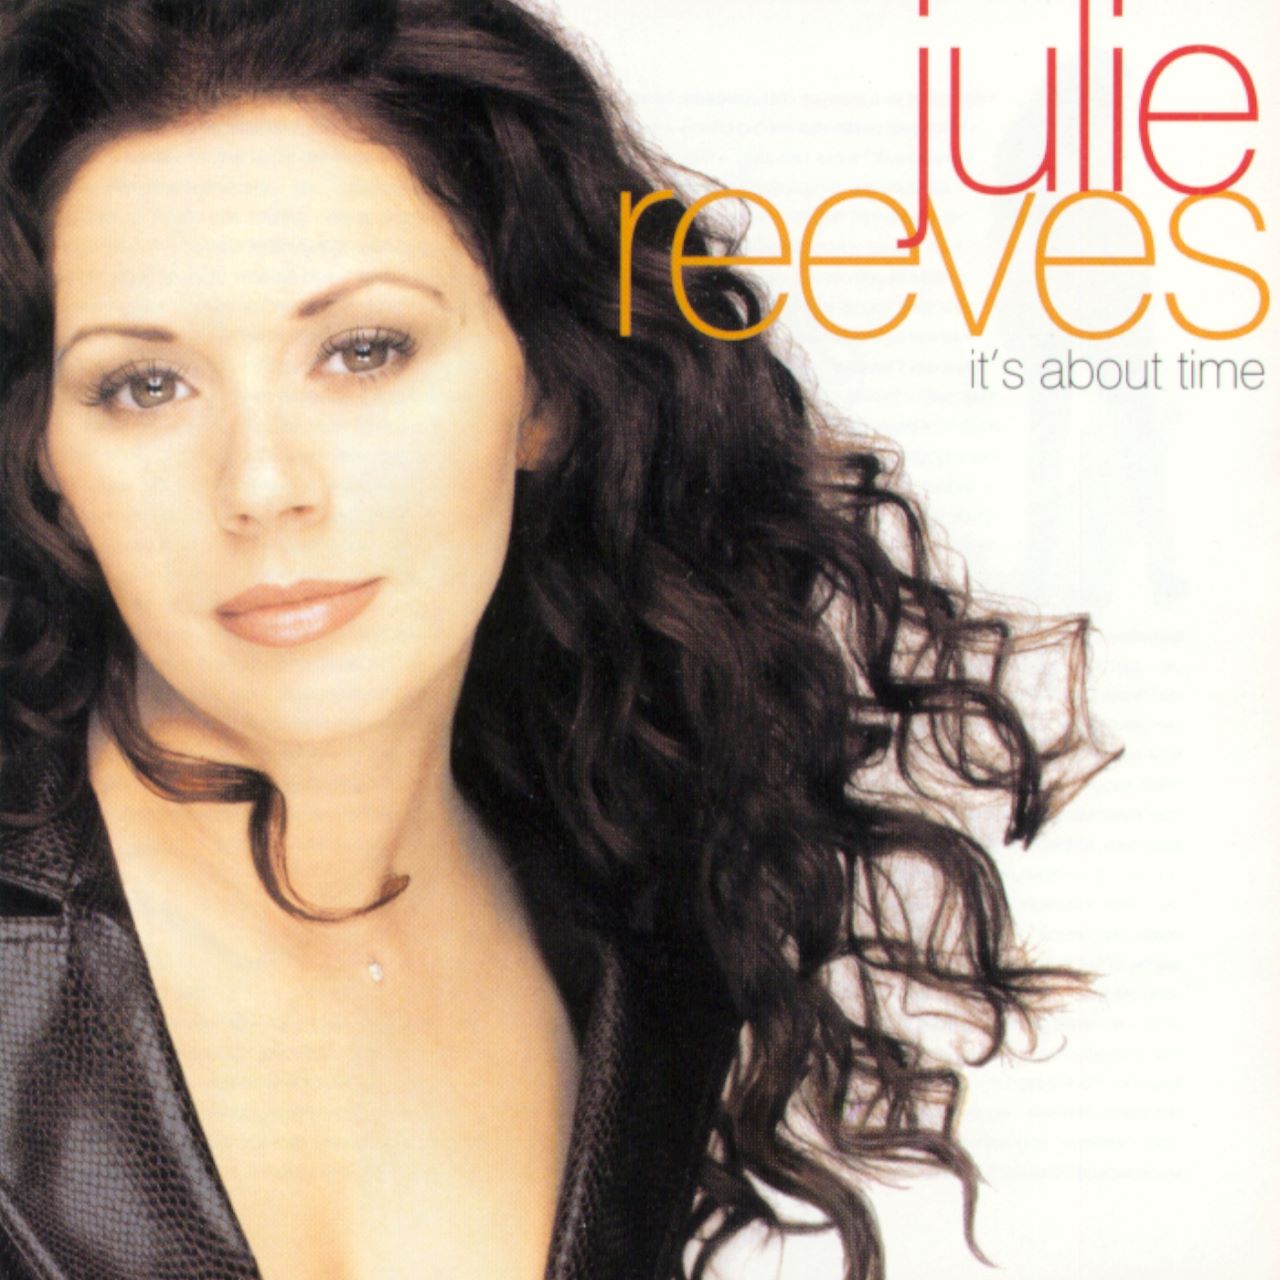 Julie Reeves - It's About Time cover album